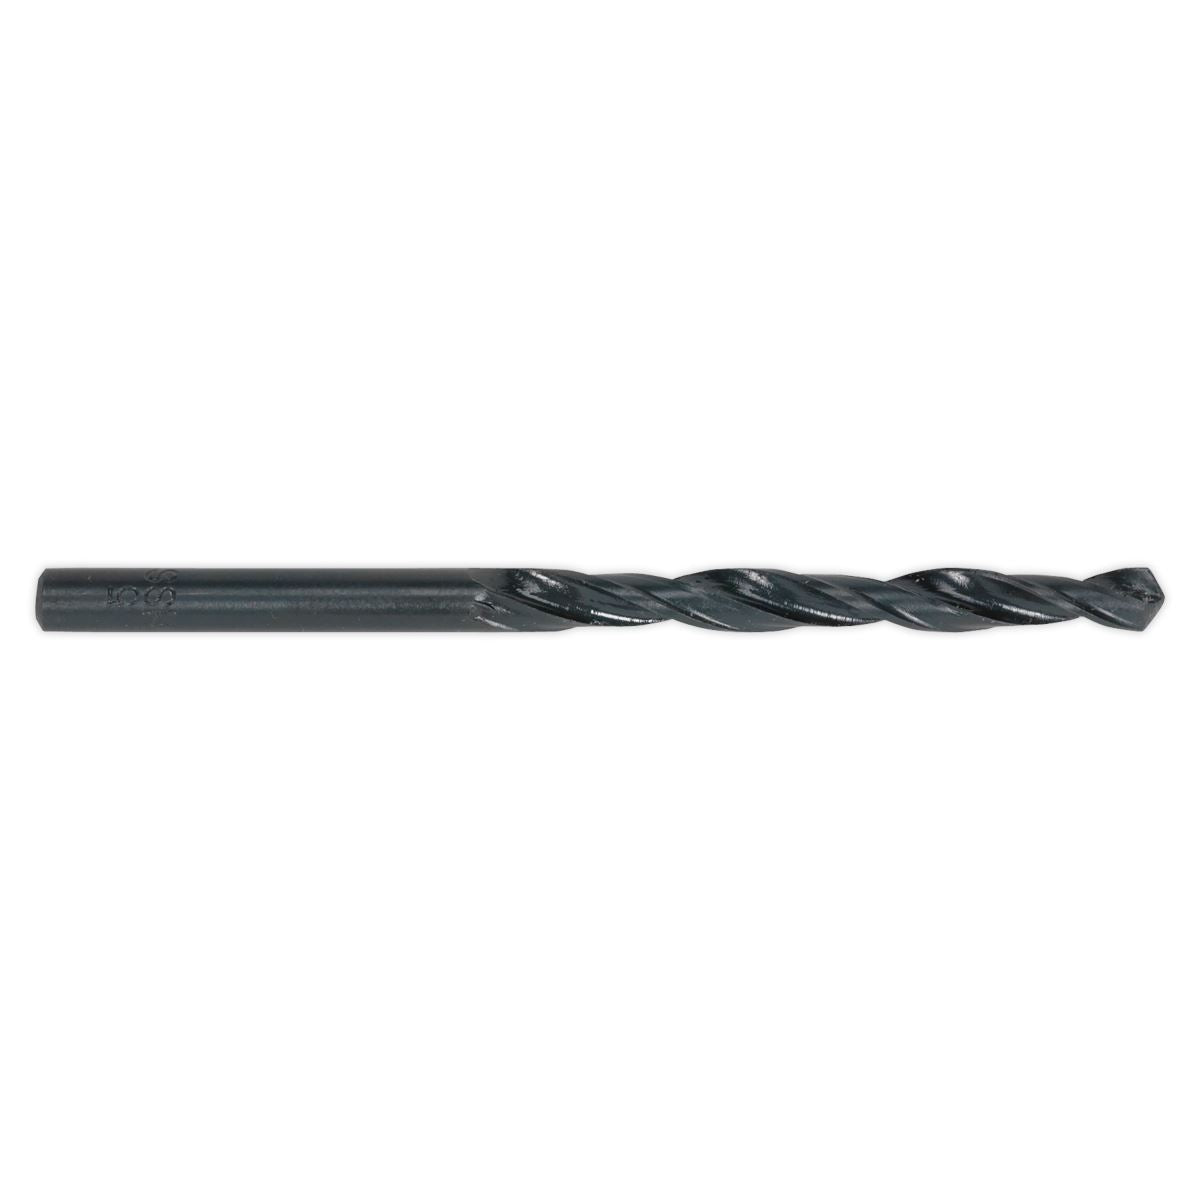 Sealey HSS Roll Forged Drill Bit Ø4mm Pack of 10